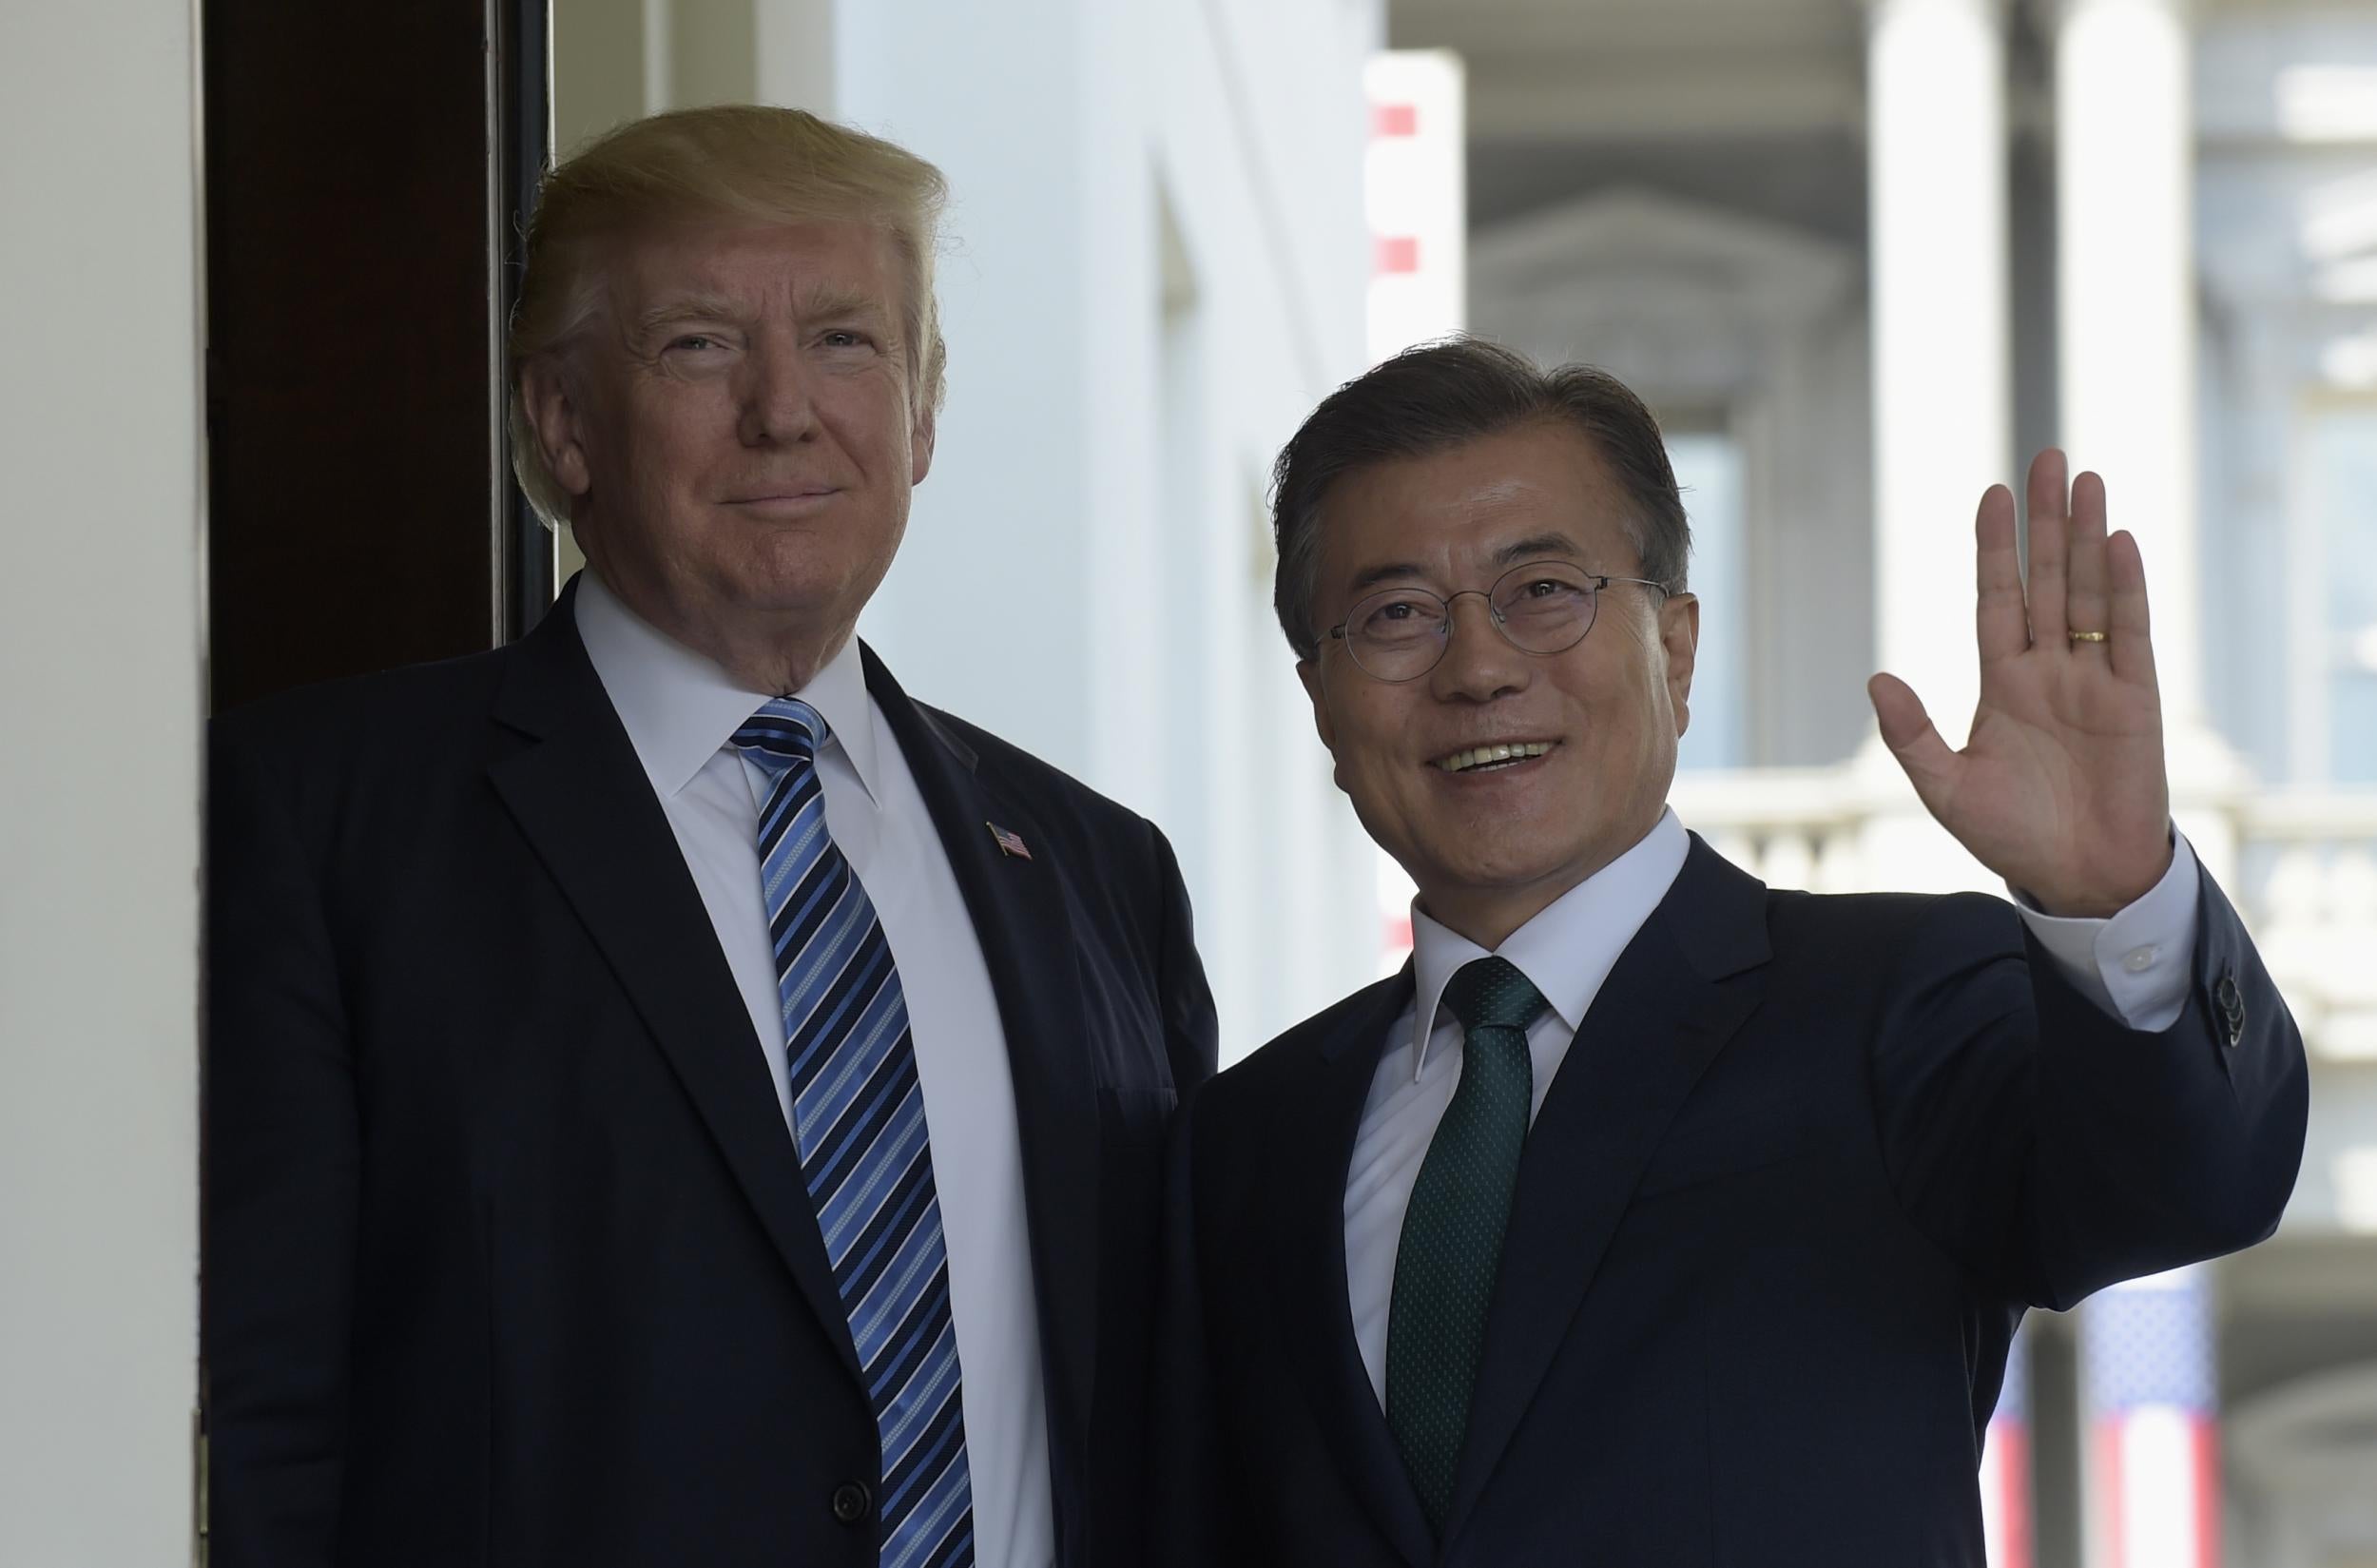 President Donald Trump welcomes South Korean President Moon Jae-in to the White House